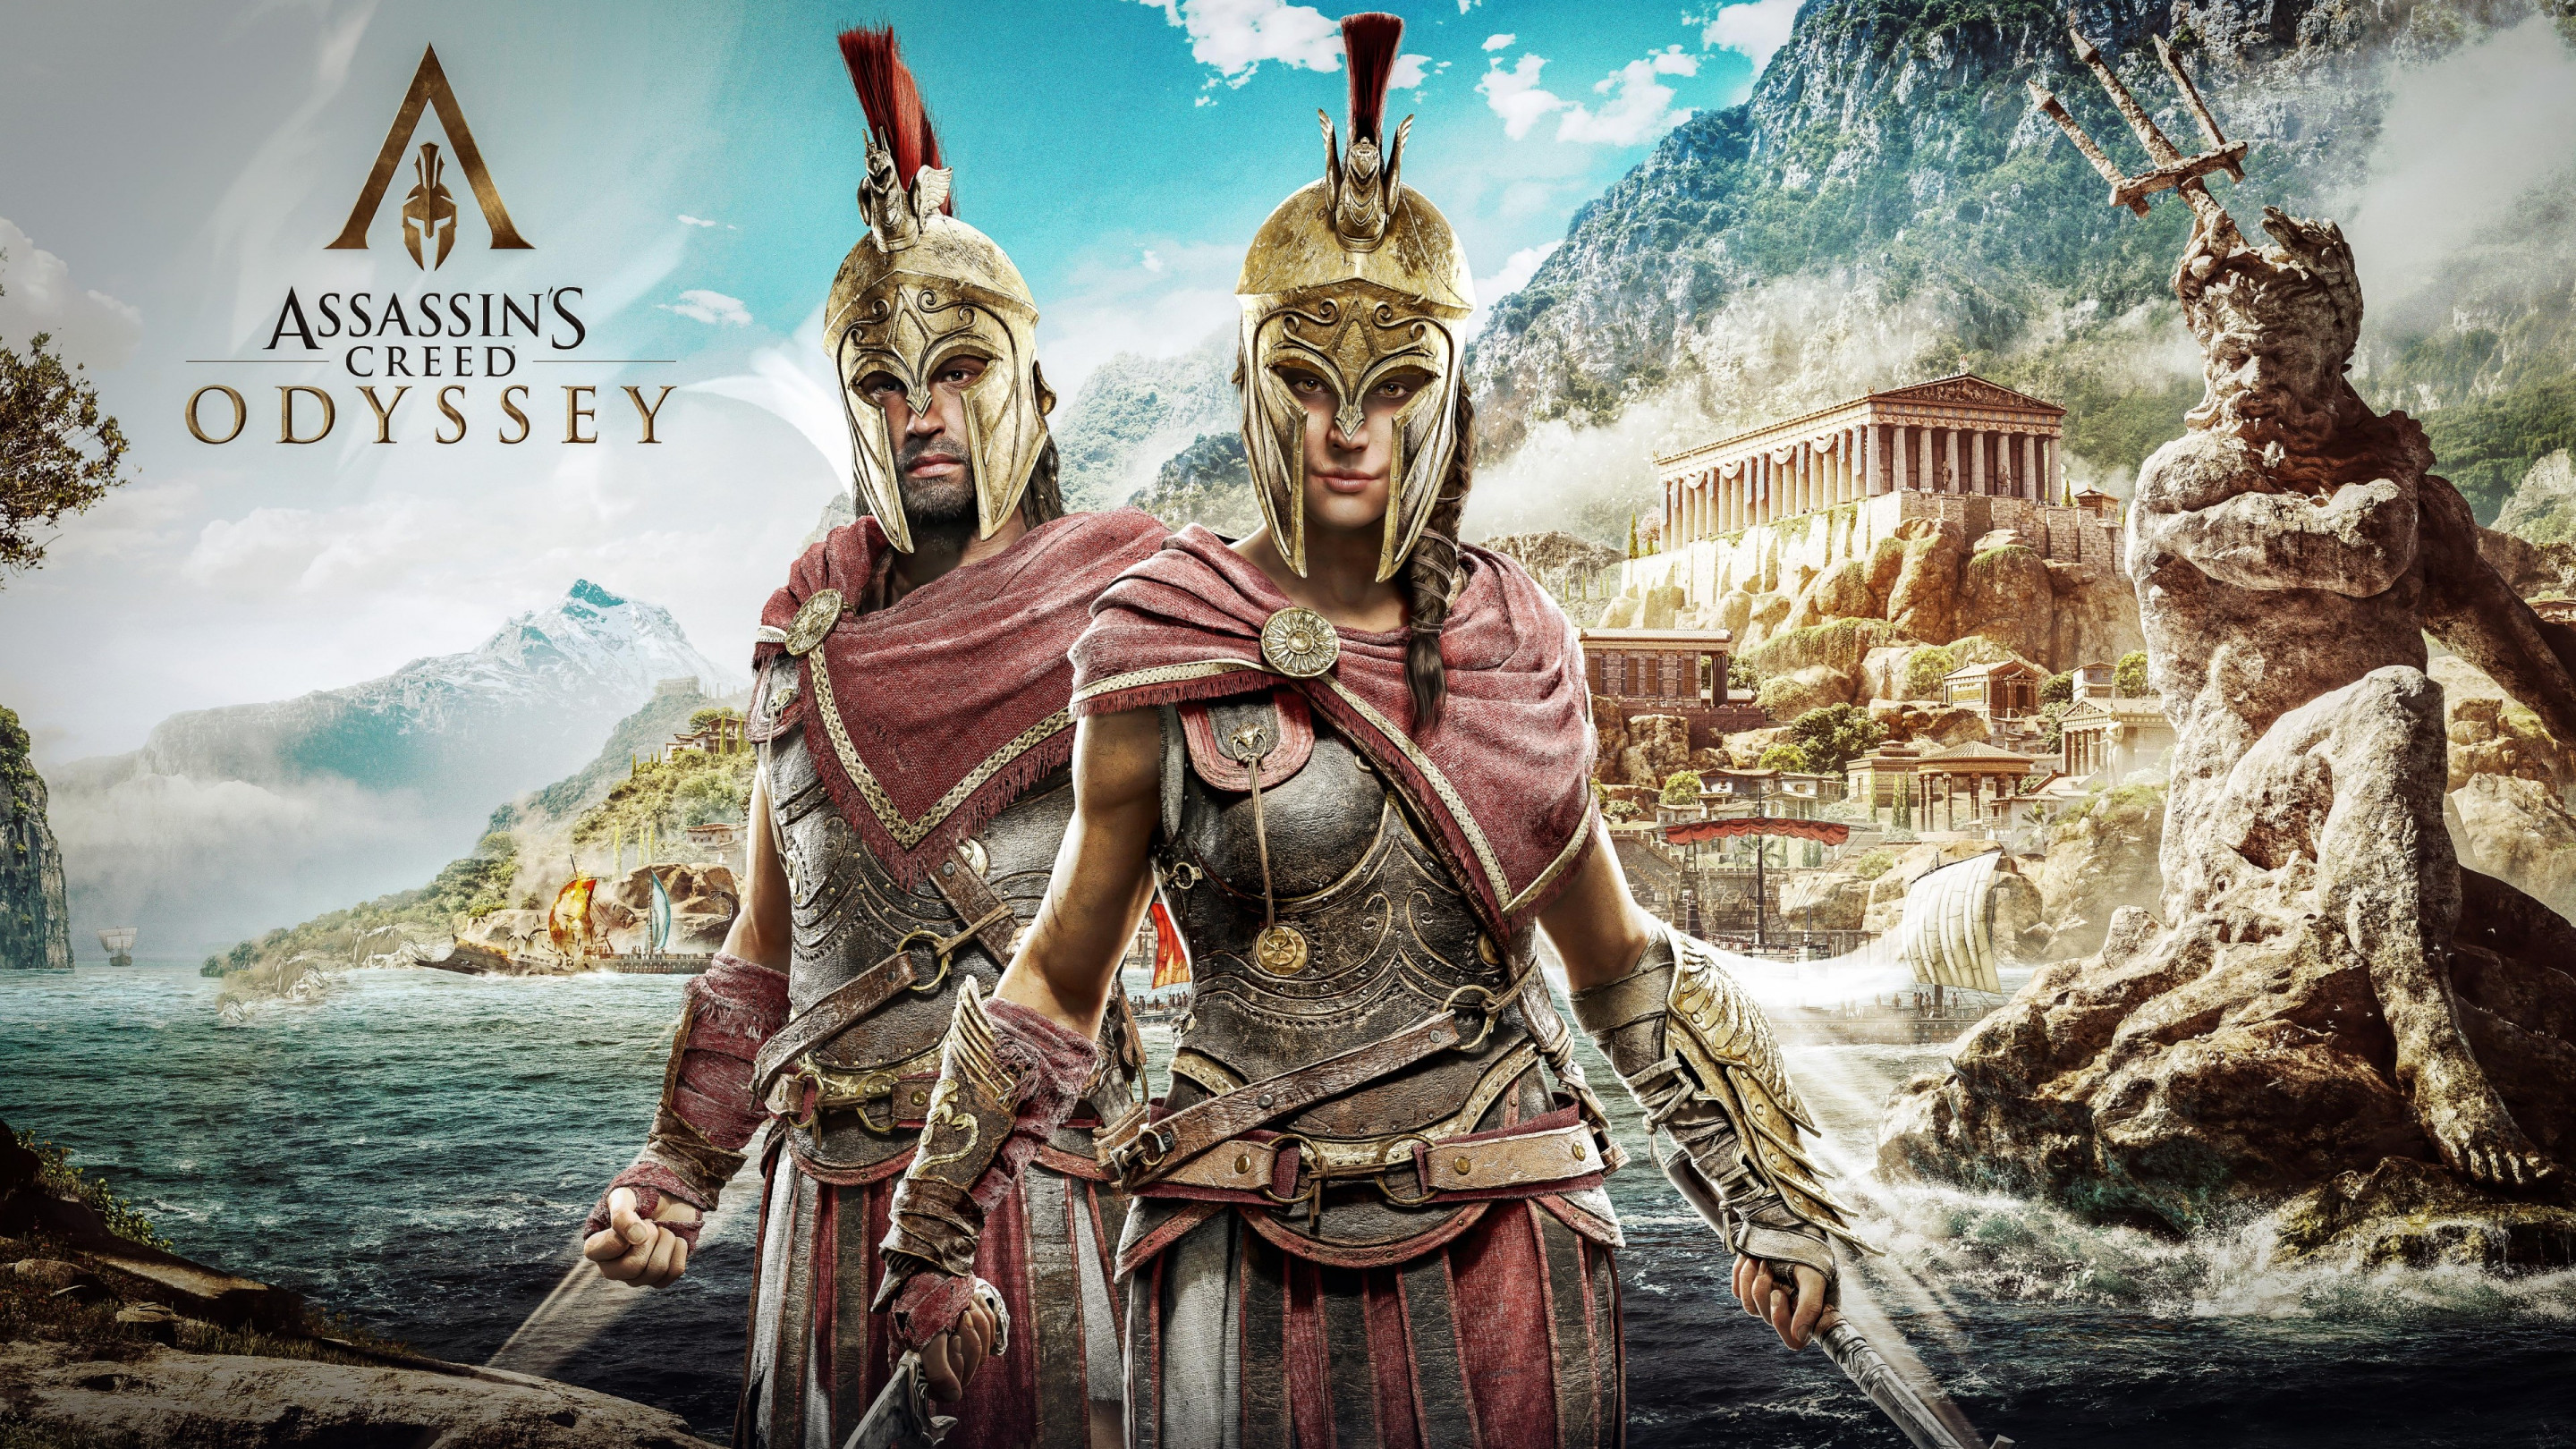 Assassin's Creed Odyssey poster wallpaper 2880x1620